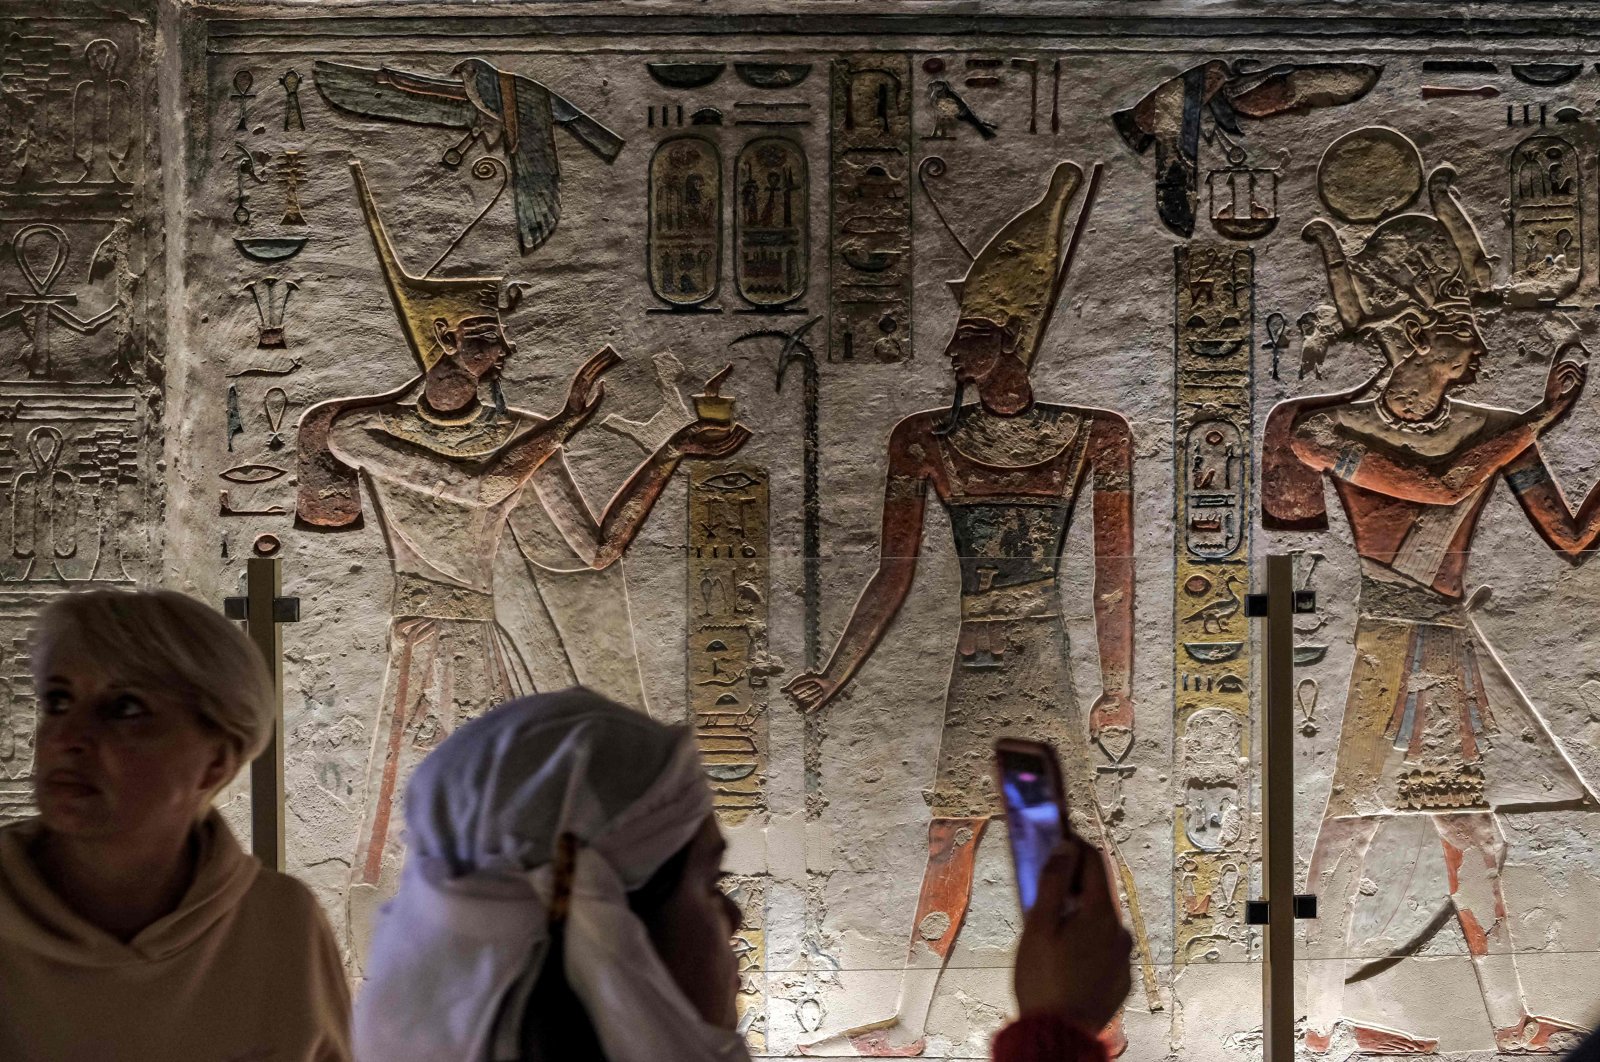 Visitors tour around KV11, the Tomb of Pharaoh Ramses III (1186-1155 B.C.), at the Valley of the Kings on the West Bank of the Nile river off of Egypt&#039;s southern city of Luxor, Jan. 18, 2022. (AFP Photo)